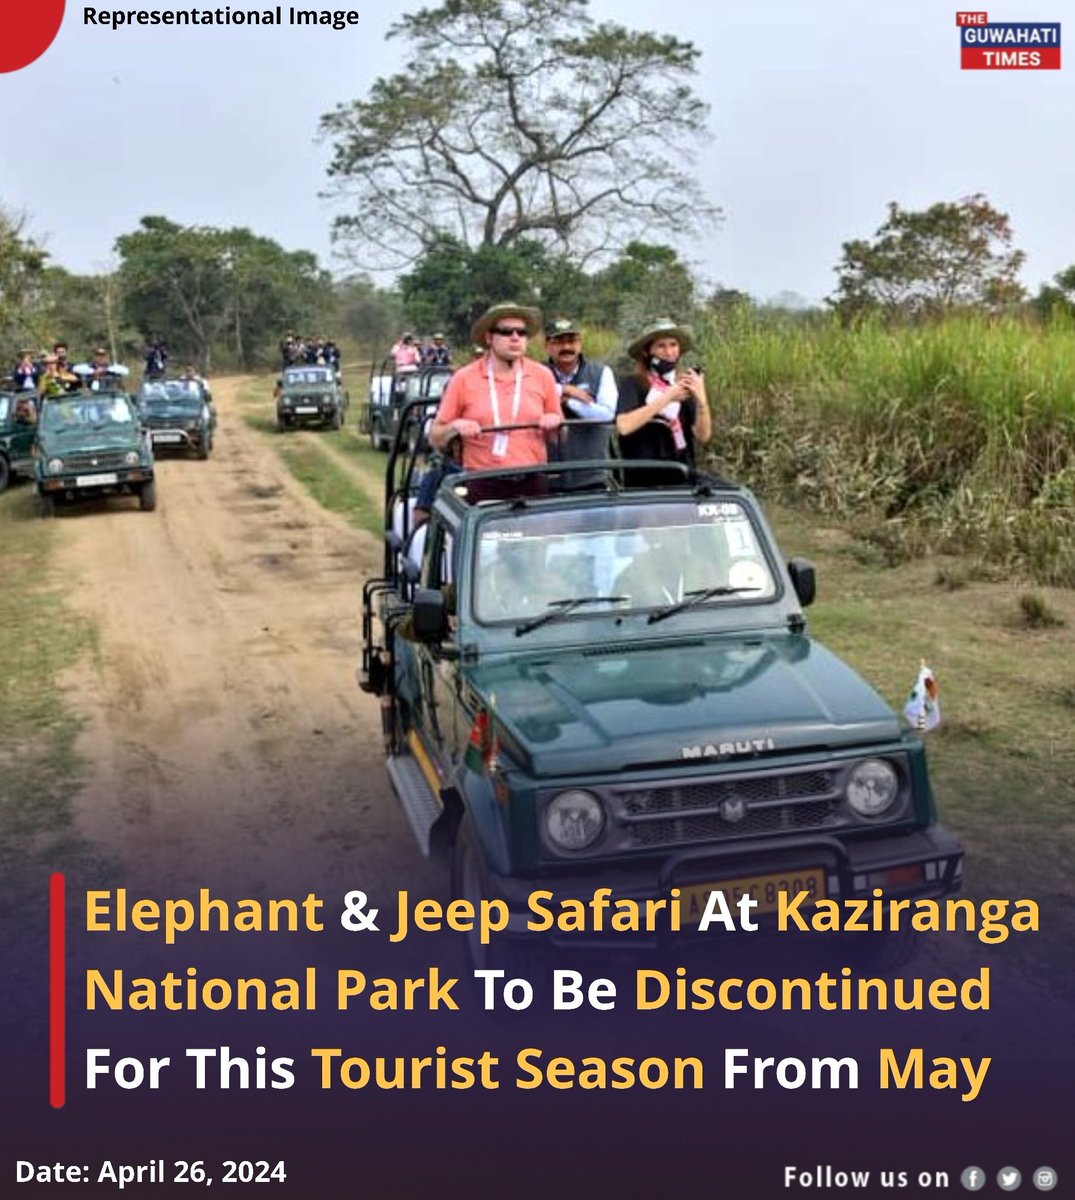 The elephant and jeep safari at the Kaziranga National Park in #Assam will be discontinued for this tourist season from May 1 and May 16 respectively.

Read more: facebook.com/share/p/byh5uD…